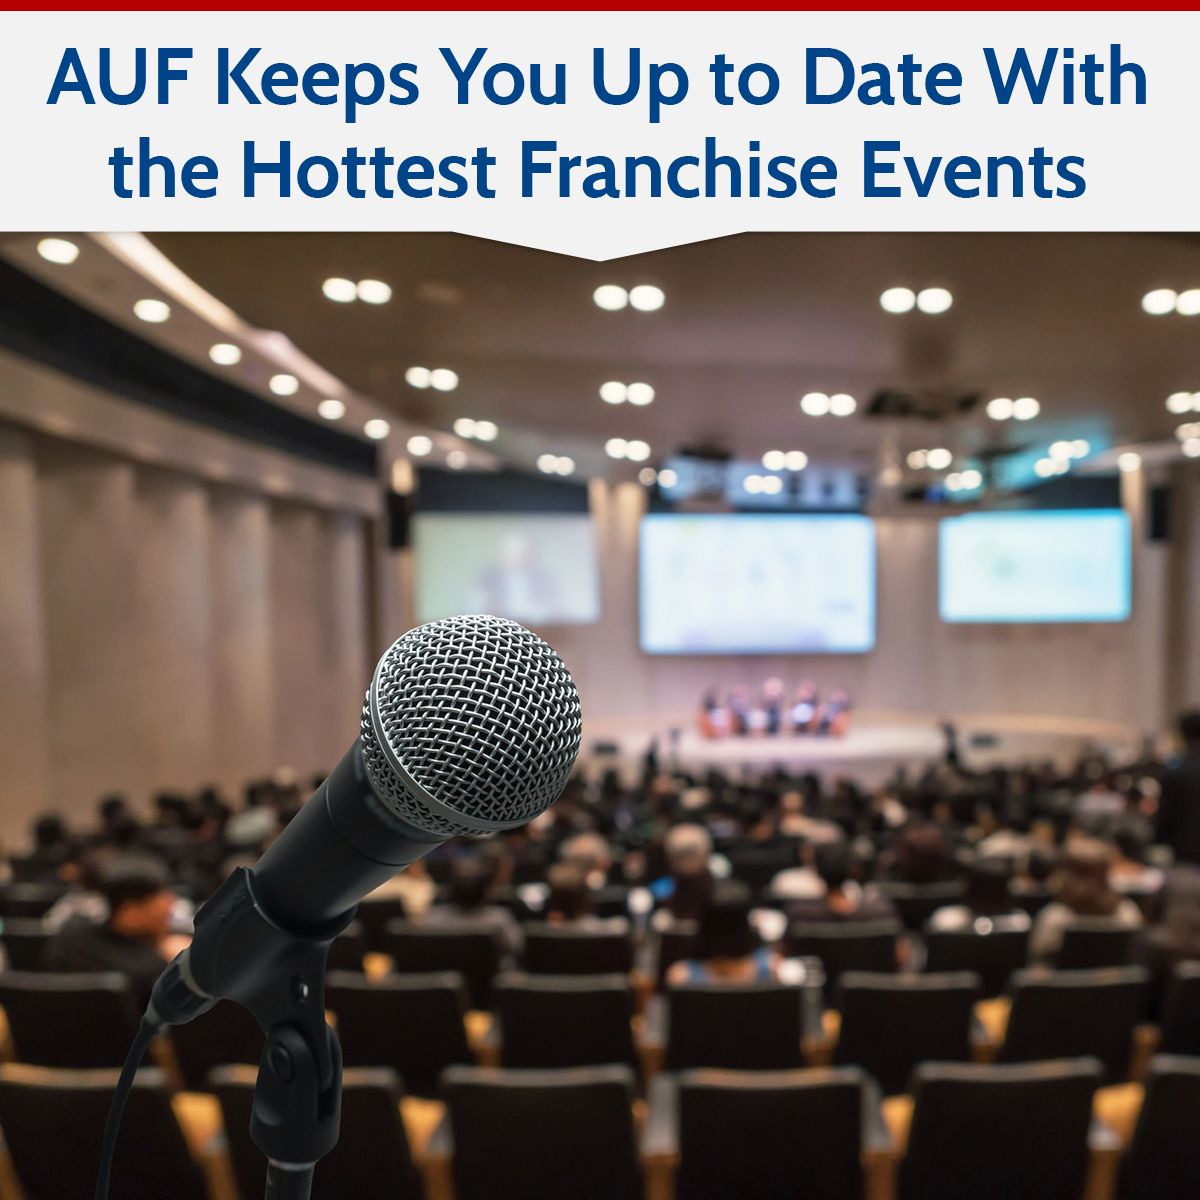 AUF Keeps You Up to Date With the Hottest Franchise Events